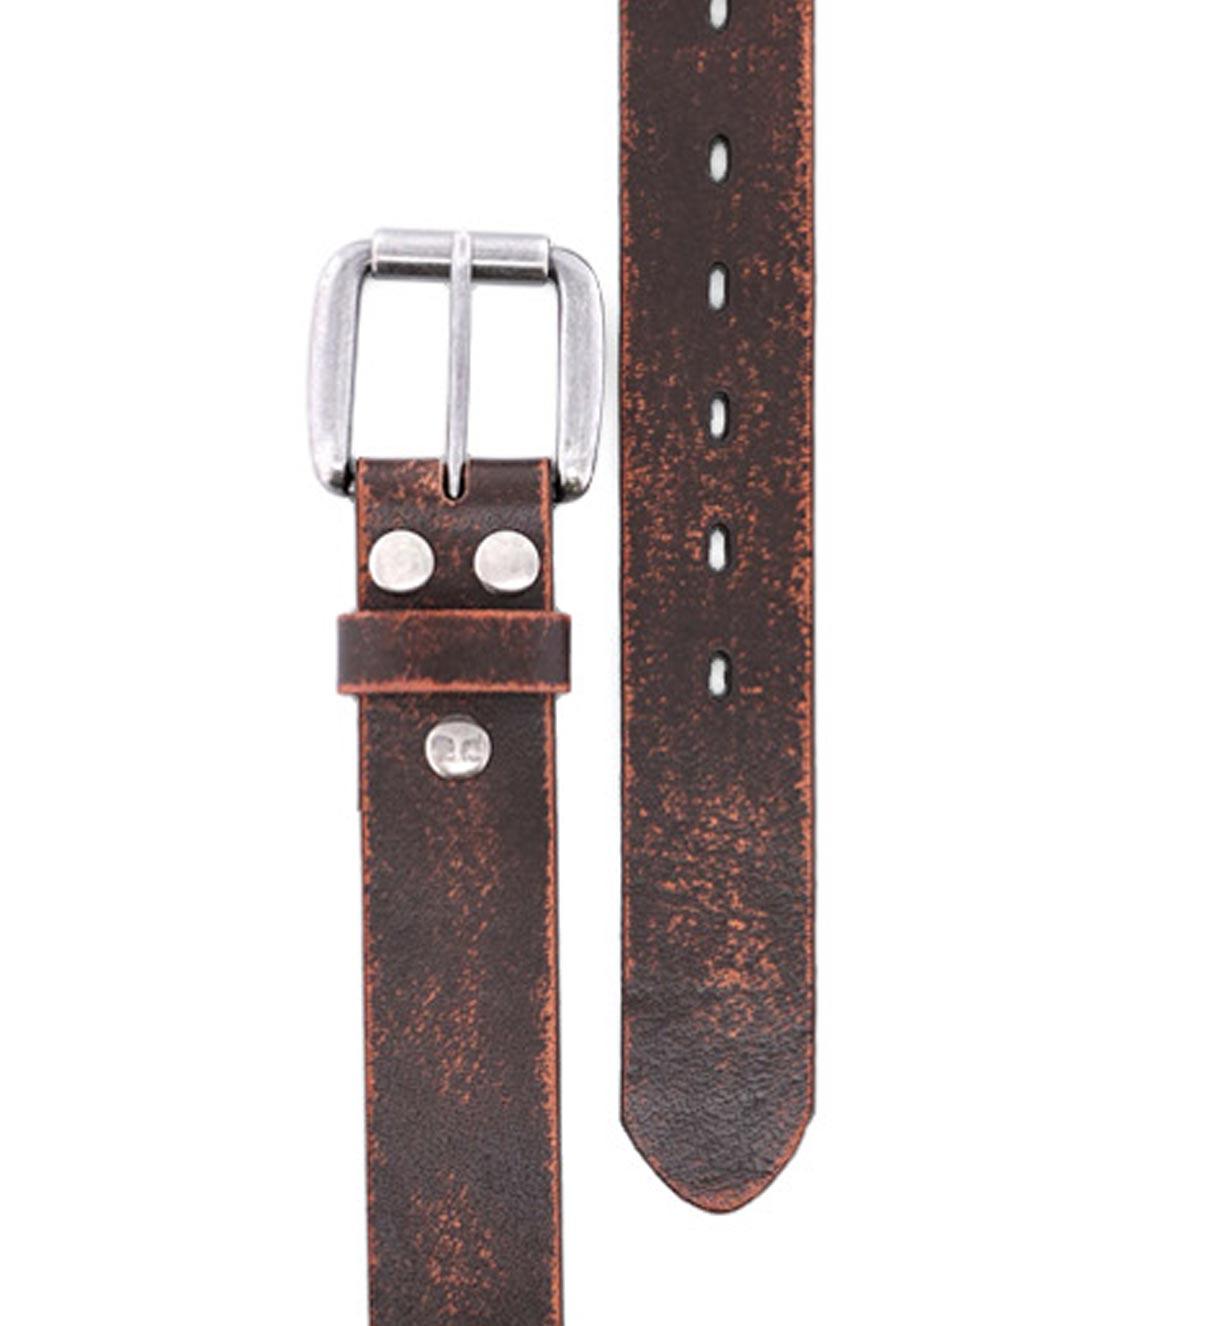 A brown leather Drifter belt by Bed Stu on a white background.